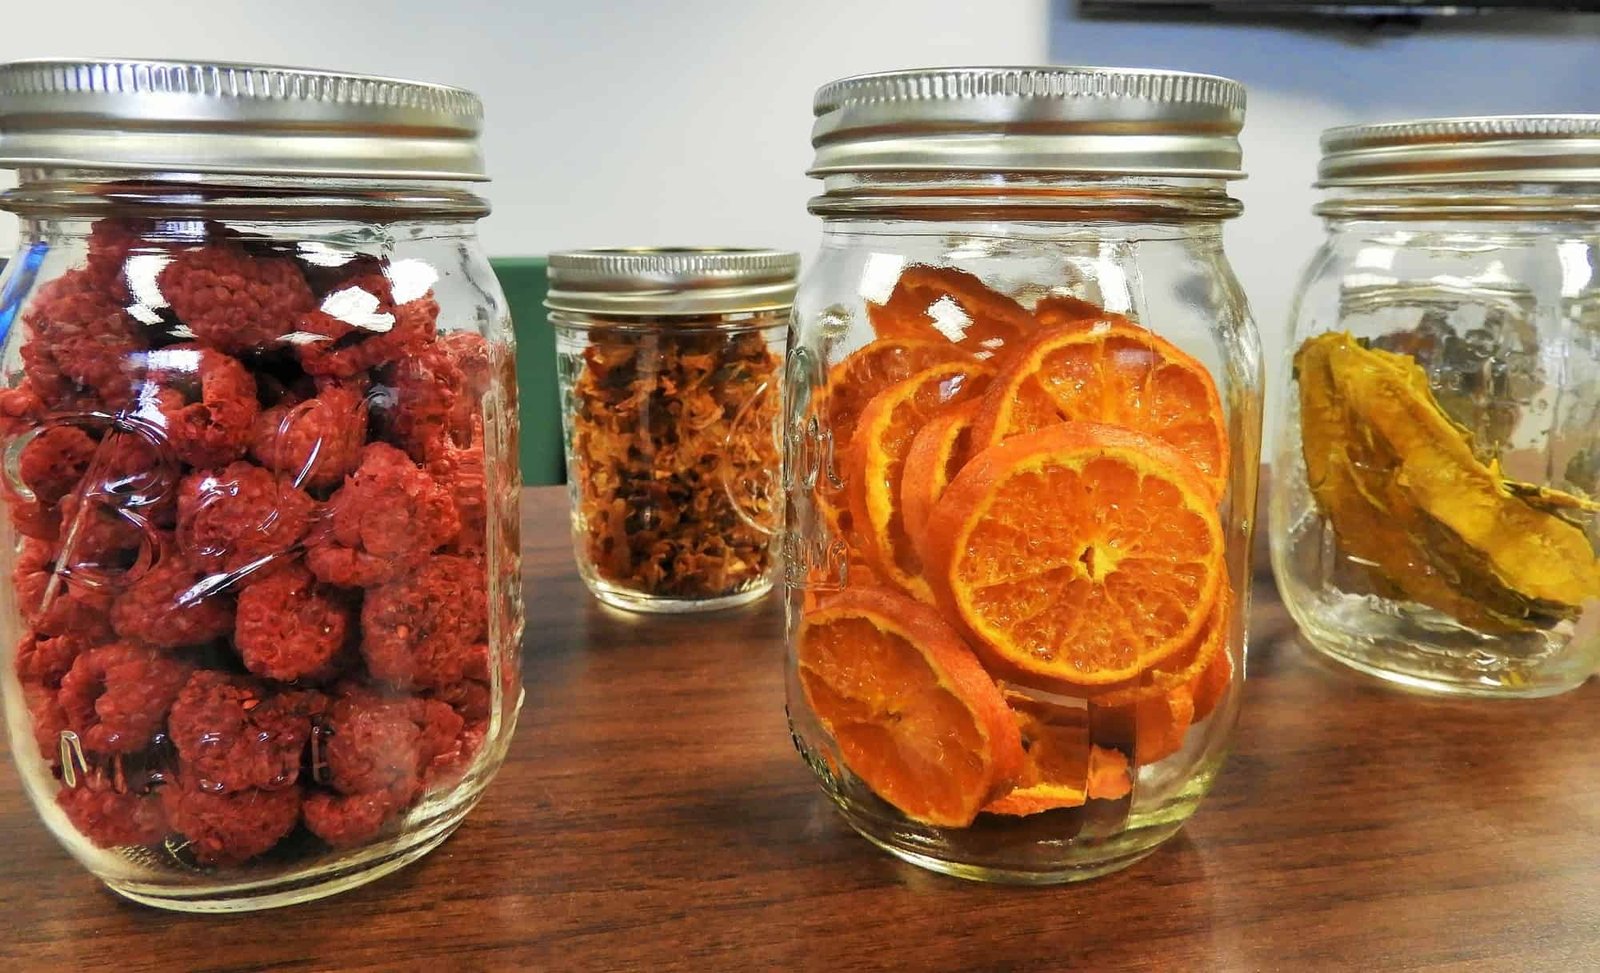 assortment of dehydrated food in jars